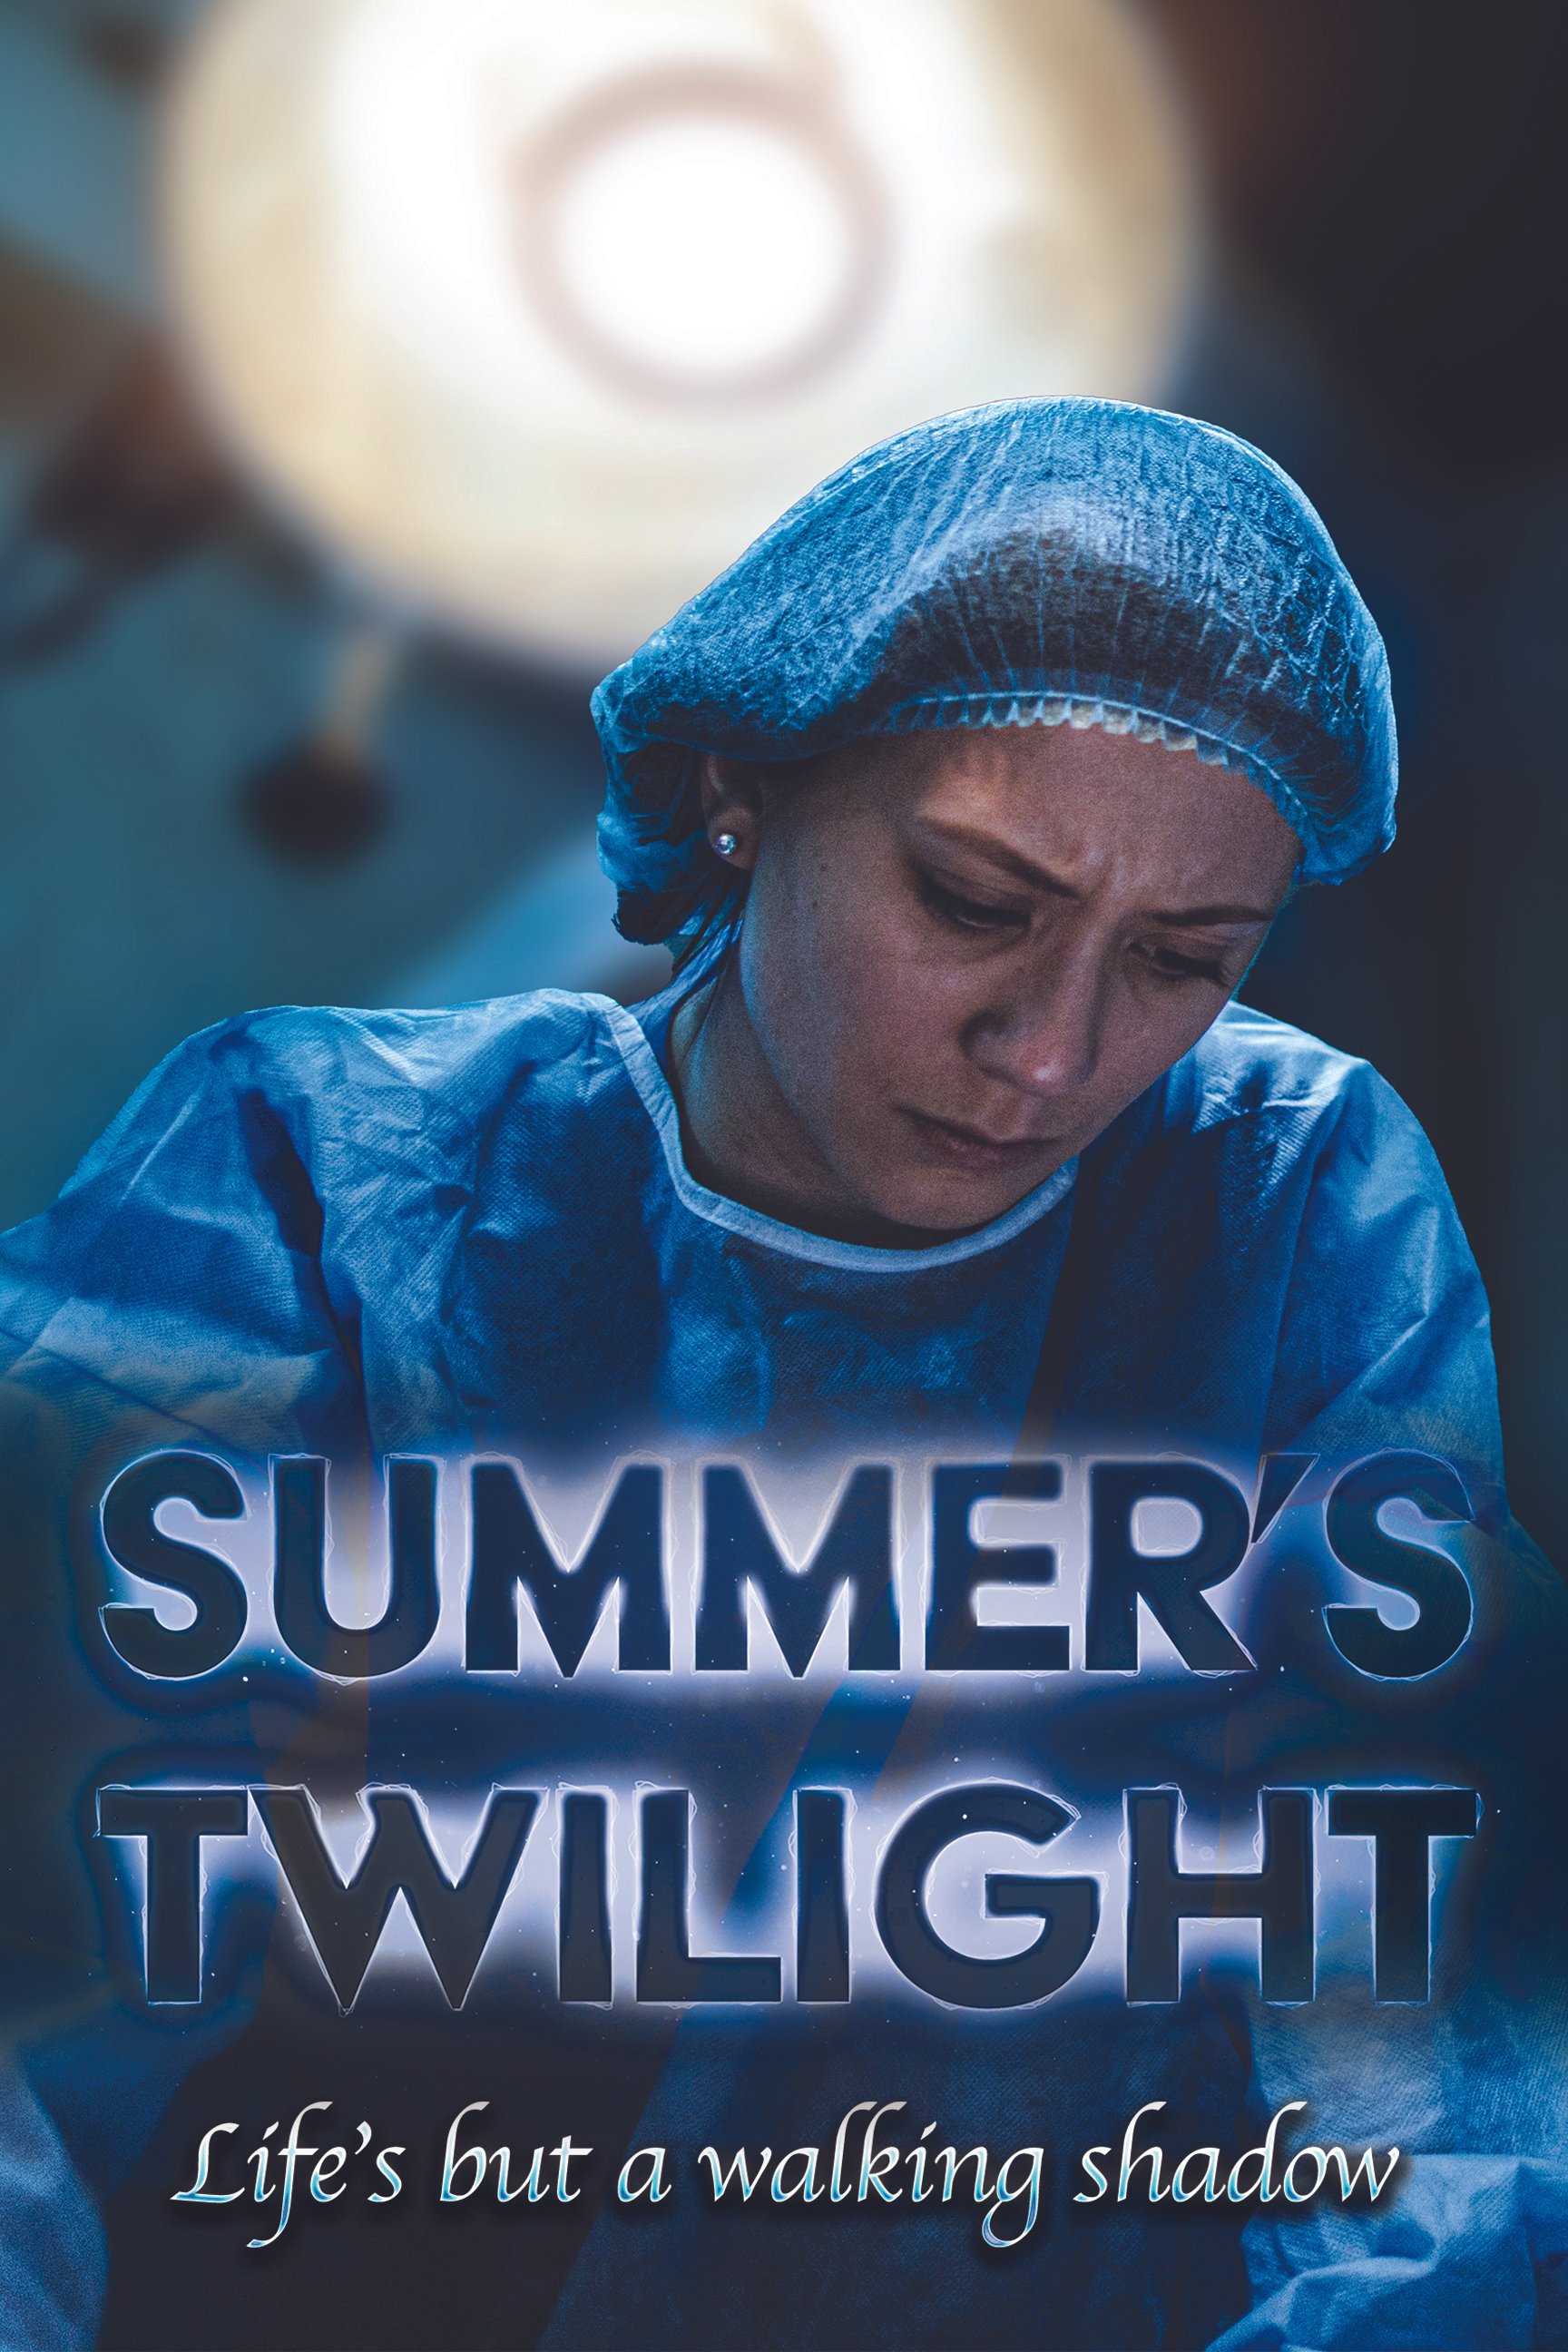 Summers Twilight Poster - Orderly copy.jpg